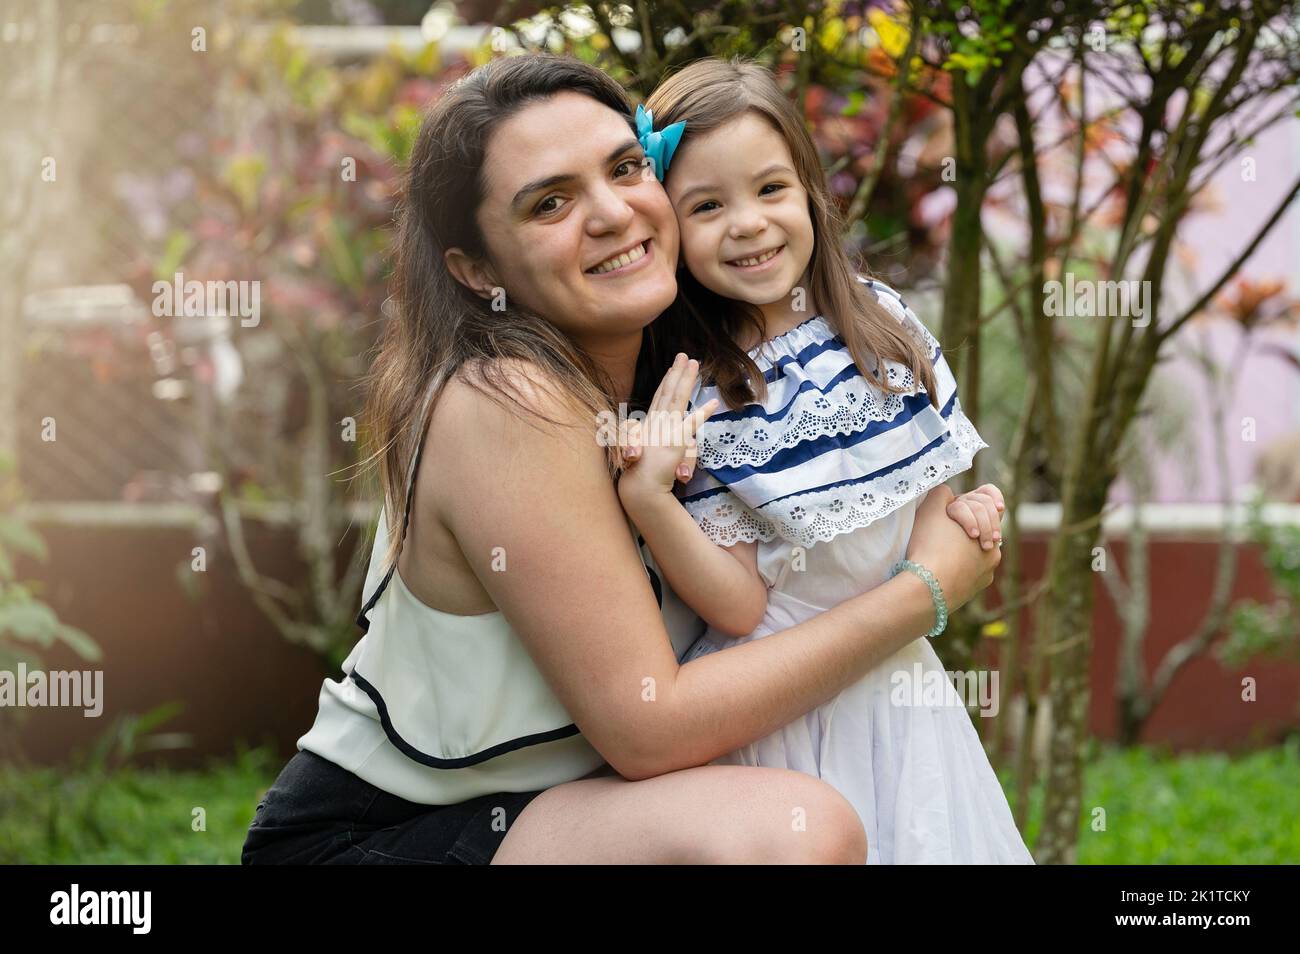 Portrait of hispanic mother and daughter on blurred park background Stock Photo